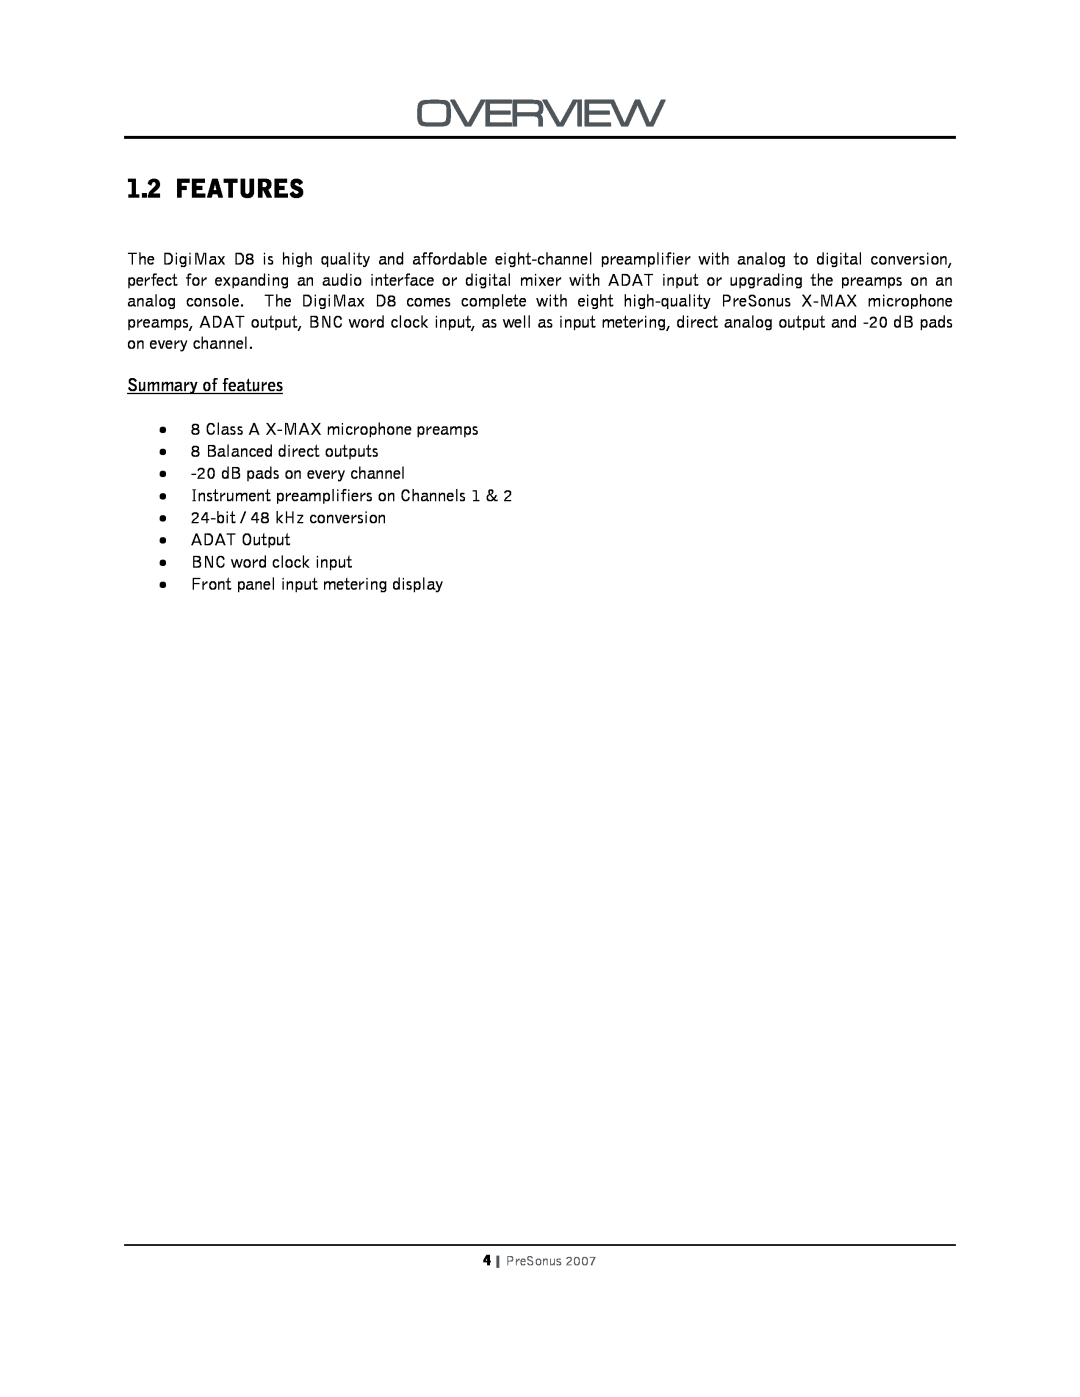 Presonus Audio electronic D8 user manual Features, Summary of features, Overview 